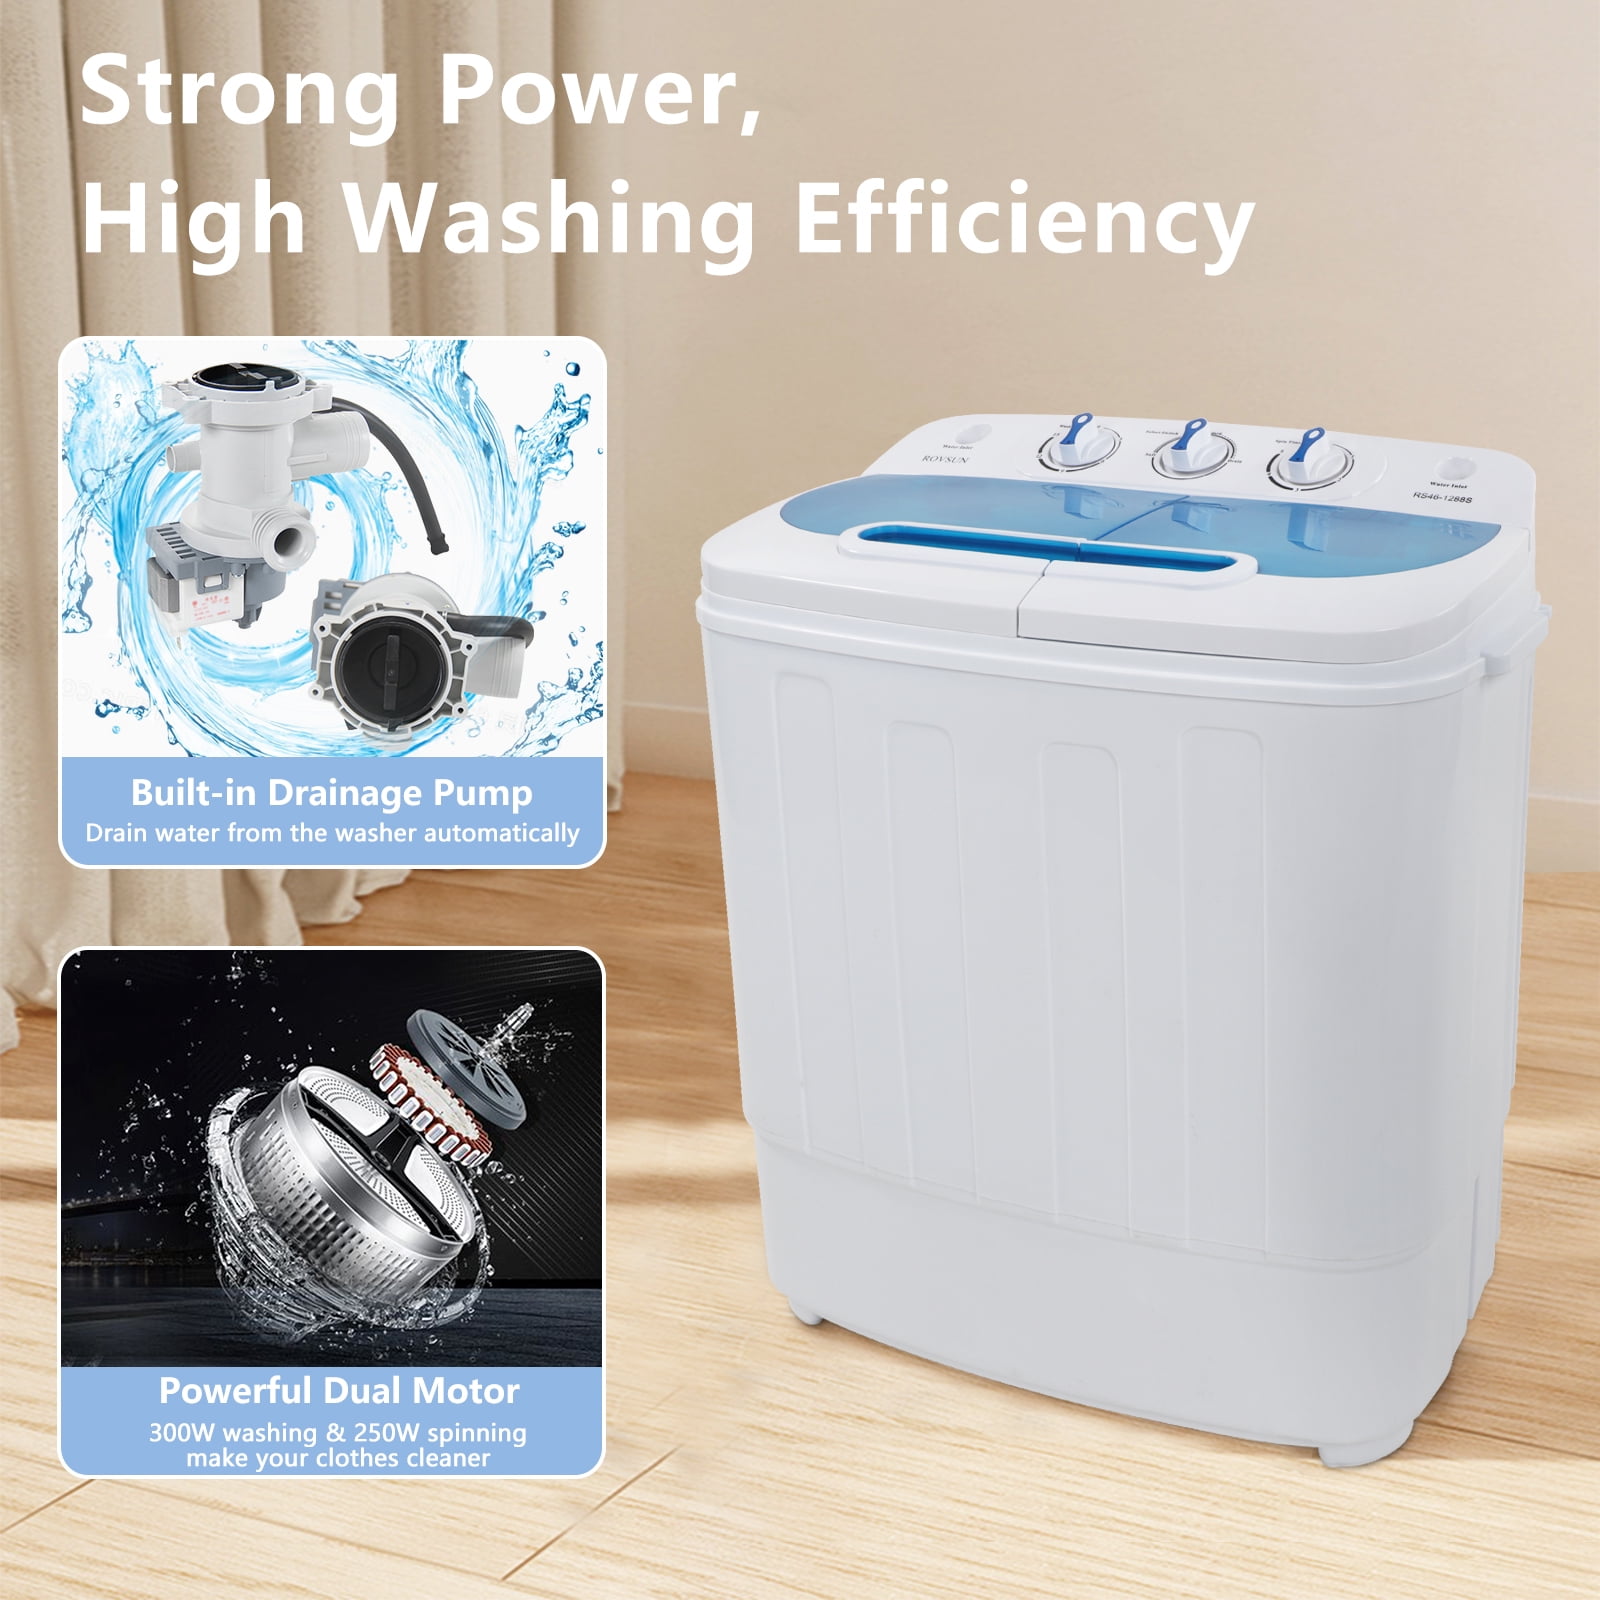  FXLCMUS Portable Laundry Machine with Built-in Drain Pump  15lbs(9lbs+6lbs) Semi-Automatic Twin Tube Washing Machine,Suitable for  Dorms Apartments and Home,White & Blue : Health & Household